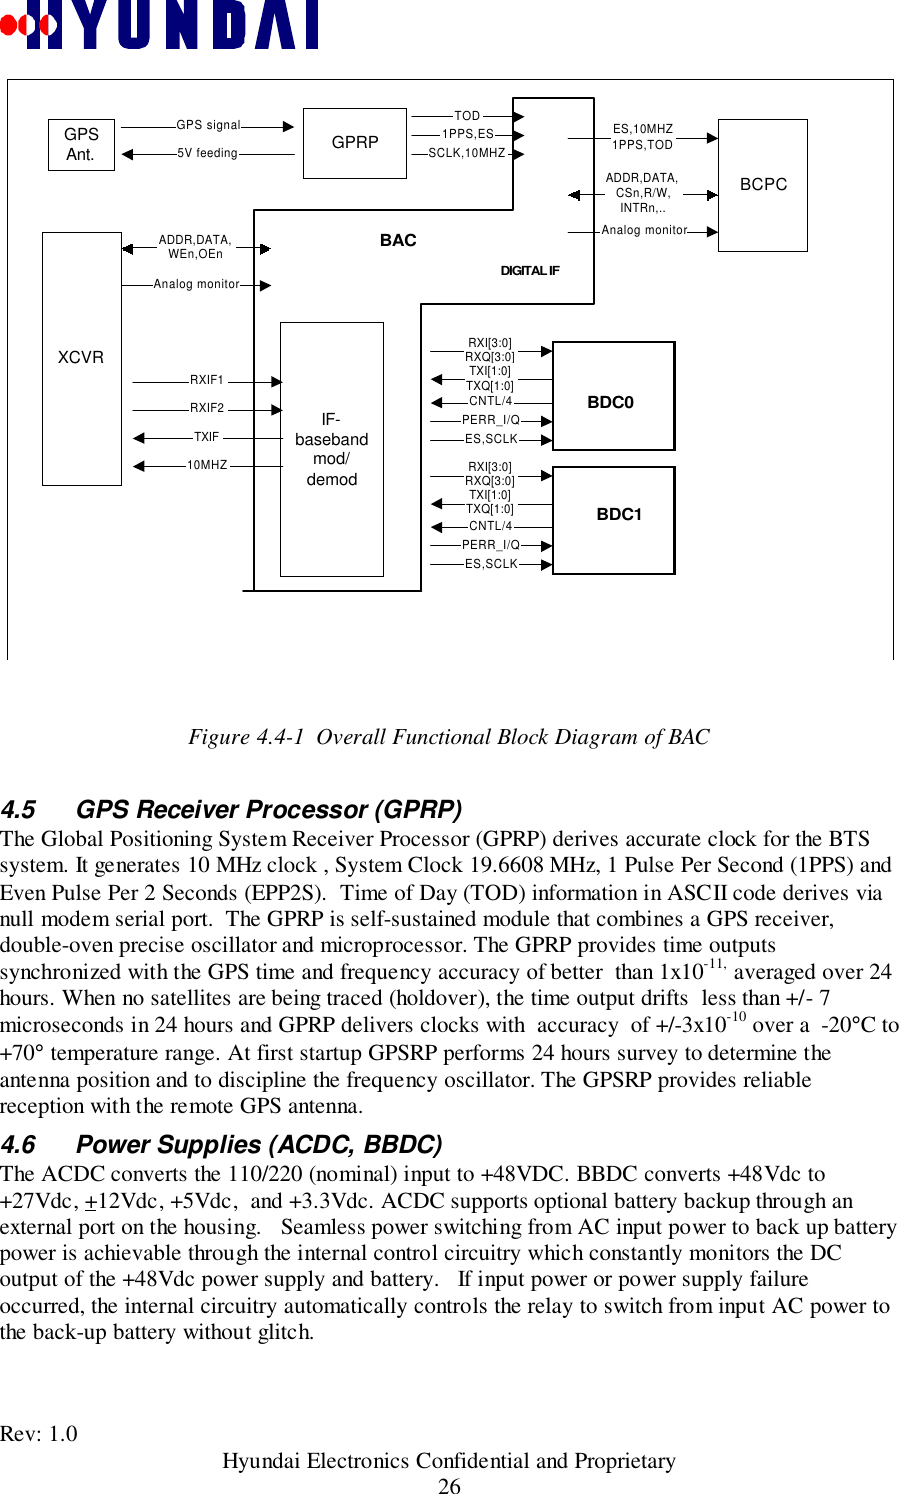 Rev: 1.0                                           Hyundai Electronics Confidential and Proprietary26Figure 4.4-1  Overall Functional Block Diagram of BAC4.5  GPS Receiver Processor (GPRP)The Global Positioning System Receiver Processor (GPRP) derives accurate clock for the BTSsystem. It generates 10 MHz clock , System Clock 19.6608 MHz, 1 Pulse Per Second (1PPS) andEven Pulse Per 2 Seconds (EPP2S).  Time of Day (TOD) information in ASCII code derives vianull modem serial port.  The GPRP is self-sustained module that combines a GPS receiver,double-oven precise oscillator and microprocessor. The GPRP provides time outputssynchronized with the GPS time and frequency accuracy of better  than 1x10-11, averaged over 24hours. When no satellites are being traced (holdover), the time output drifts  less than +/- 7microseconds in 24 hours and GPRP delivers clocks with  accuracy  of +/-3x10-10 over a  -20°C to+70° temperature range. At first startup GPSRP performs 24 hours survey to determine theantenna position and to discipline the frequency oscillator. The GPSRP provides reliablereception with the remote GPS antenna.4.6  Power Supplies (ACDC, BBDC)The ACDC converts the 110/220 (nominal) input to +48VDC. BBDC converts +48Vdc to+27Vdc, +12Vdc, +5Vdc,  and +3.3Vdc. ACDC supports optional battery backup through anexternal port on the housing.   Seamless power switching from AC input power to back up batterypower is achievable through the internal control circuitry which constantly monitors the DCoutput of the +48Vdc power supply and battery.   If input power or power supply failureoccurred, the internal circuitry automatically controls the relay to switch from input AC power tothe back-up battery without glitch.IF-basebandmod/demodBACGPRPRXI[3:0]RXQ[3:0]ES,SCLKPERR_I/QCNTL/4TXI[1:0]TXQ[1:0]BDC0RXI[3:0]RXQ[3:0]ES,SCLKPERR_I/QCNTL/4TXI[1:0]TXQ[1:0]BDC11PPS,ESSCLK,10MHZTODDIGITAL IFES,10MHZ1PPS,TODADDR,DATA,CSn,R/W,INTRn,..ADDR,DATA,WEn,OEnAnalog monitorAnalog monitorRXIF1RXIF2TXIF10MHZGPS signal5V feedingXCVRGPSAnt.BCPC